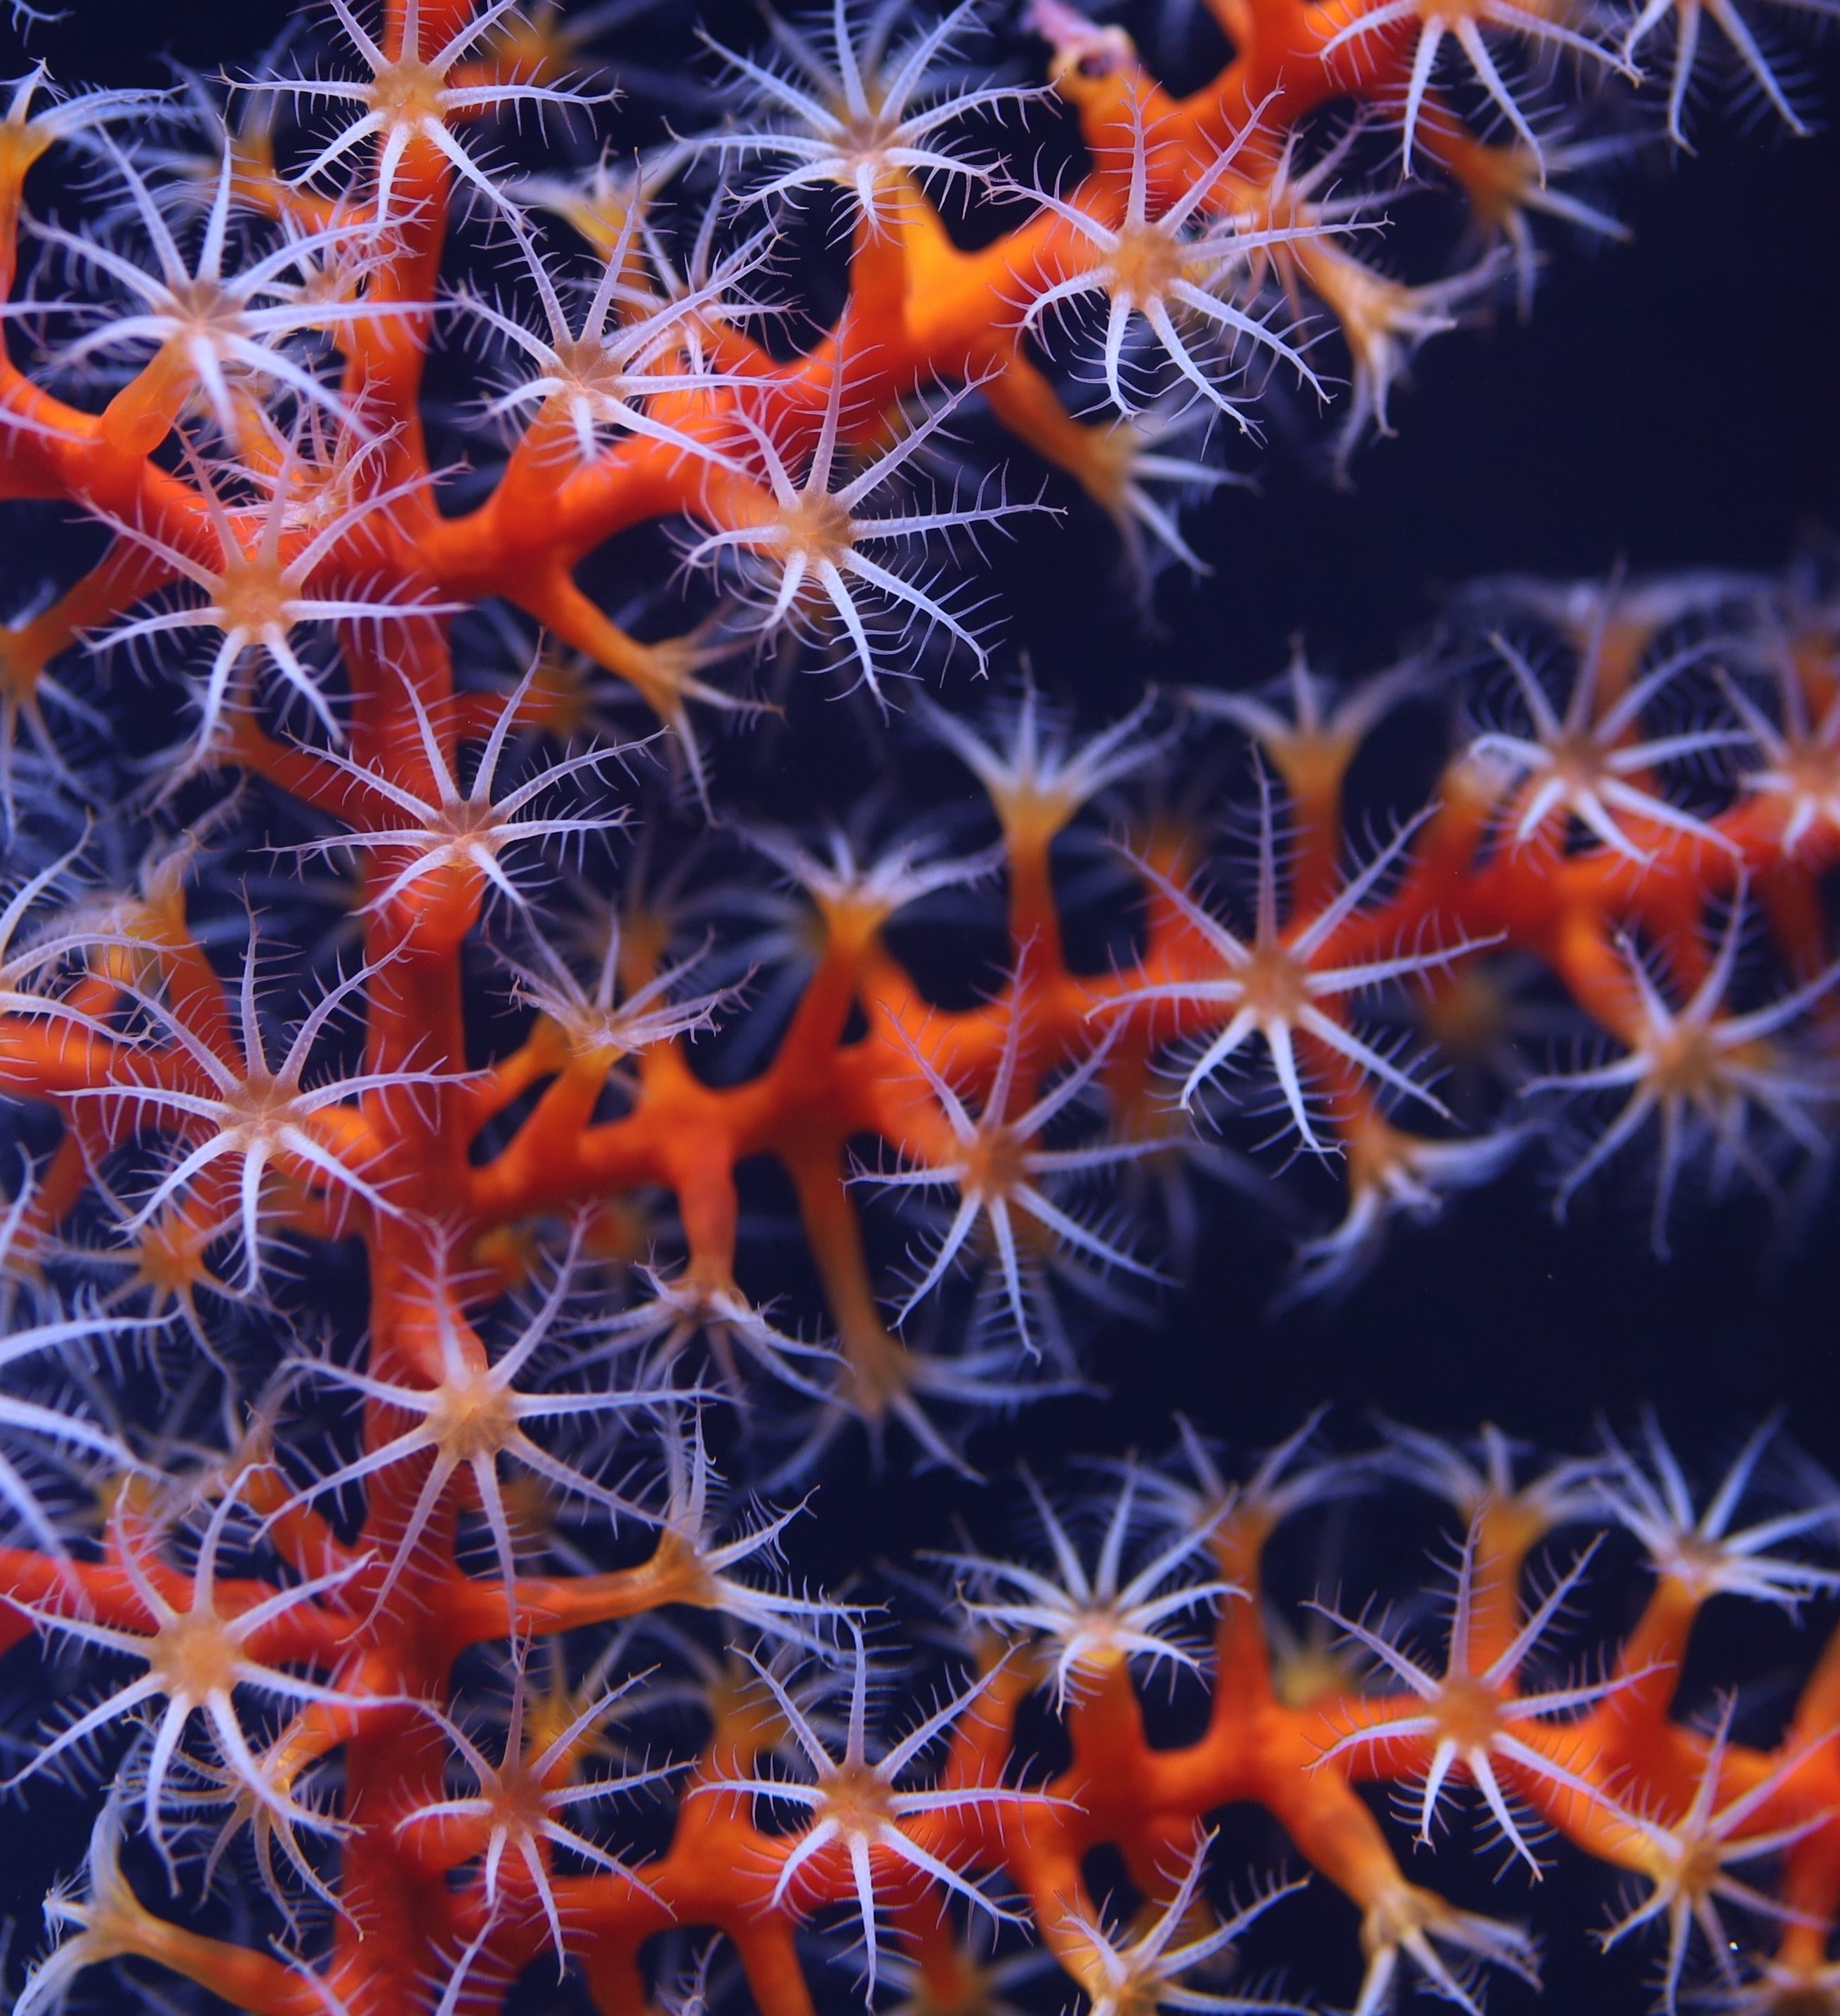 Open polyps of the mesophotic soft coral Swiftia exserta held in aquaria at the USGS Wetland and Aquatic Research Center, Gainesville, FL, USA. Photo courtesy of Jayci Grosso, and edited by Mark McCauley, contractors to the USGS. Photo is in the public domain.